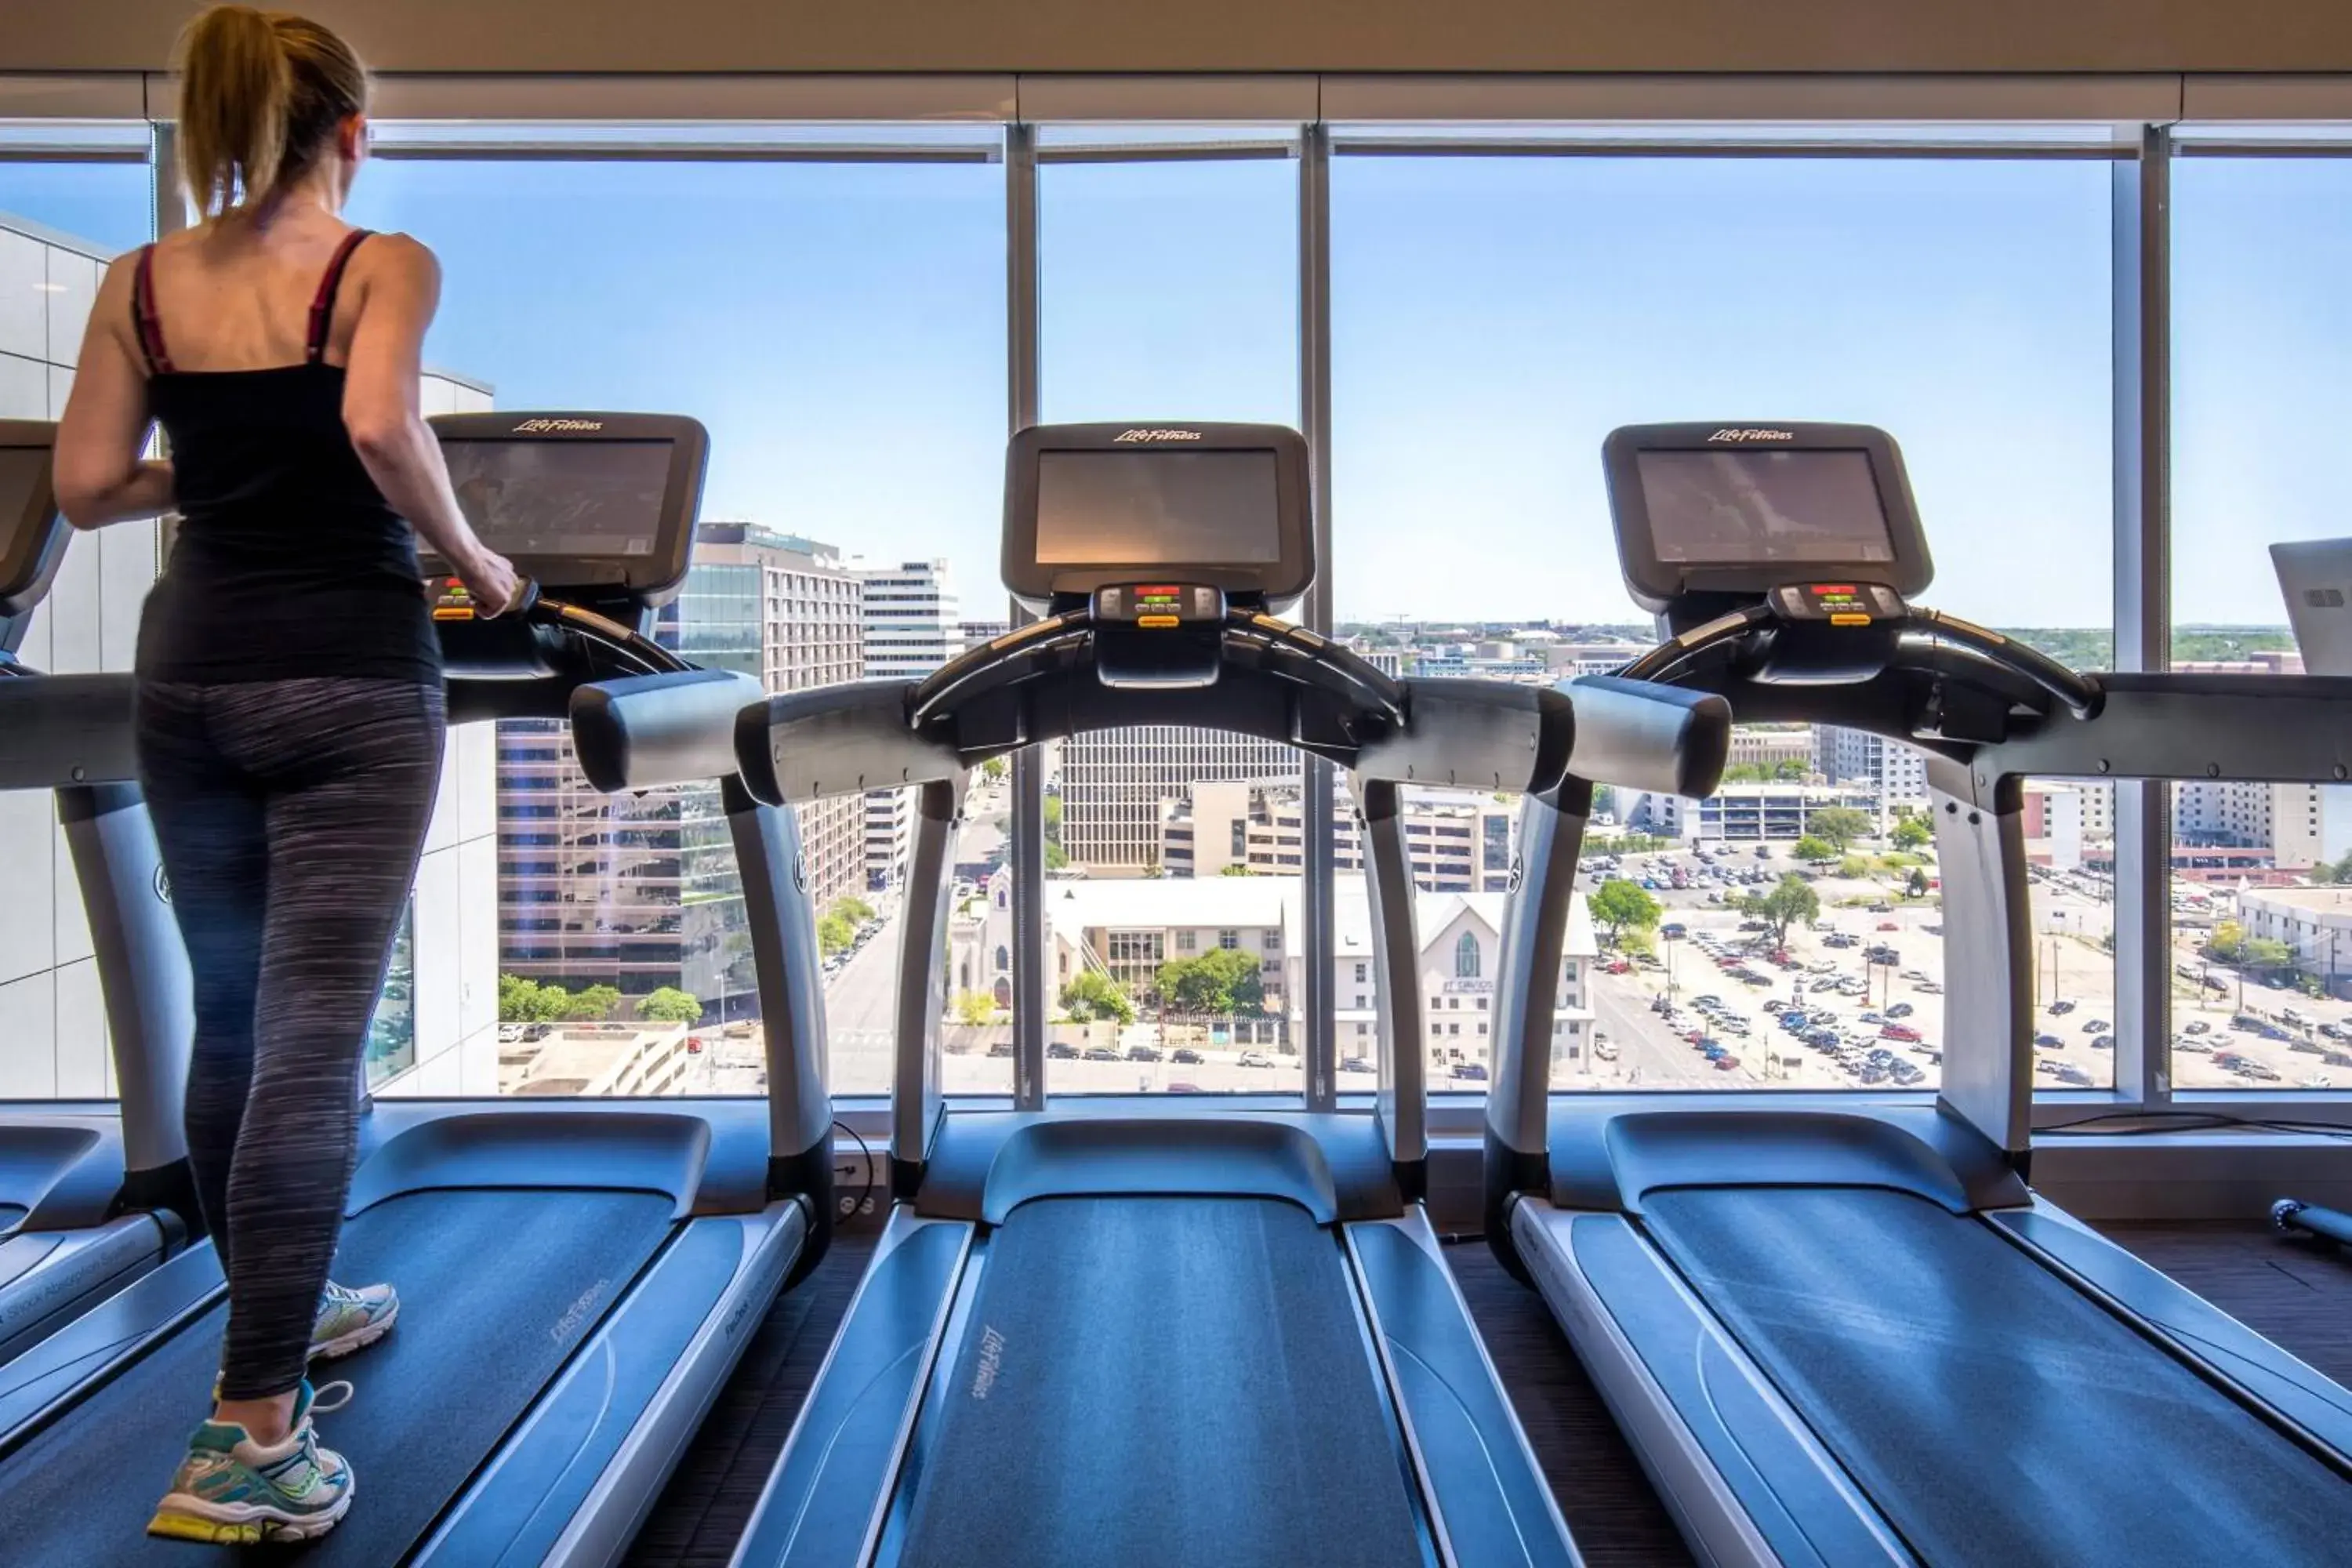 Fitness centre/facilities, Fitness Center/Facilities in The Westin Austin Downtown